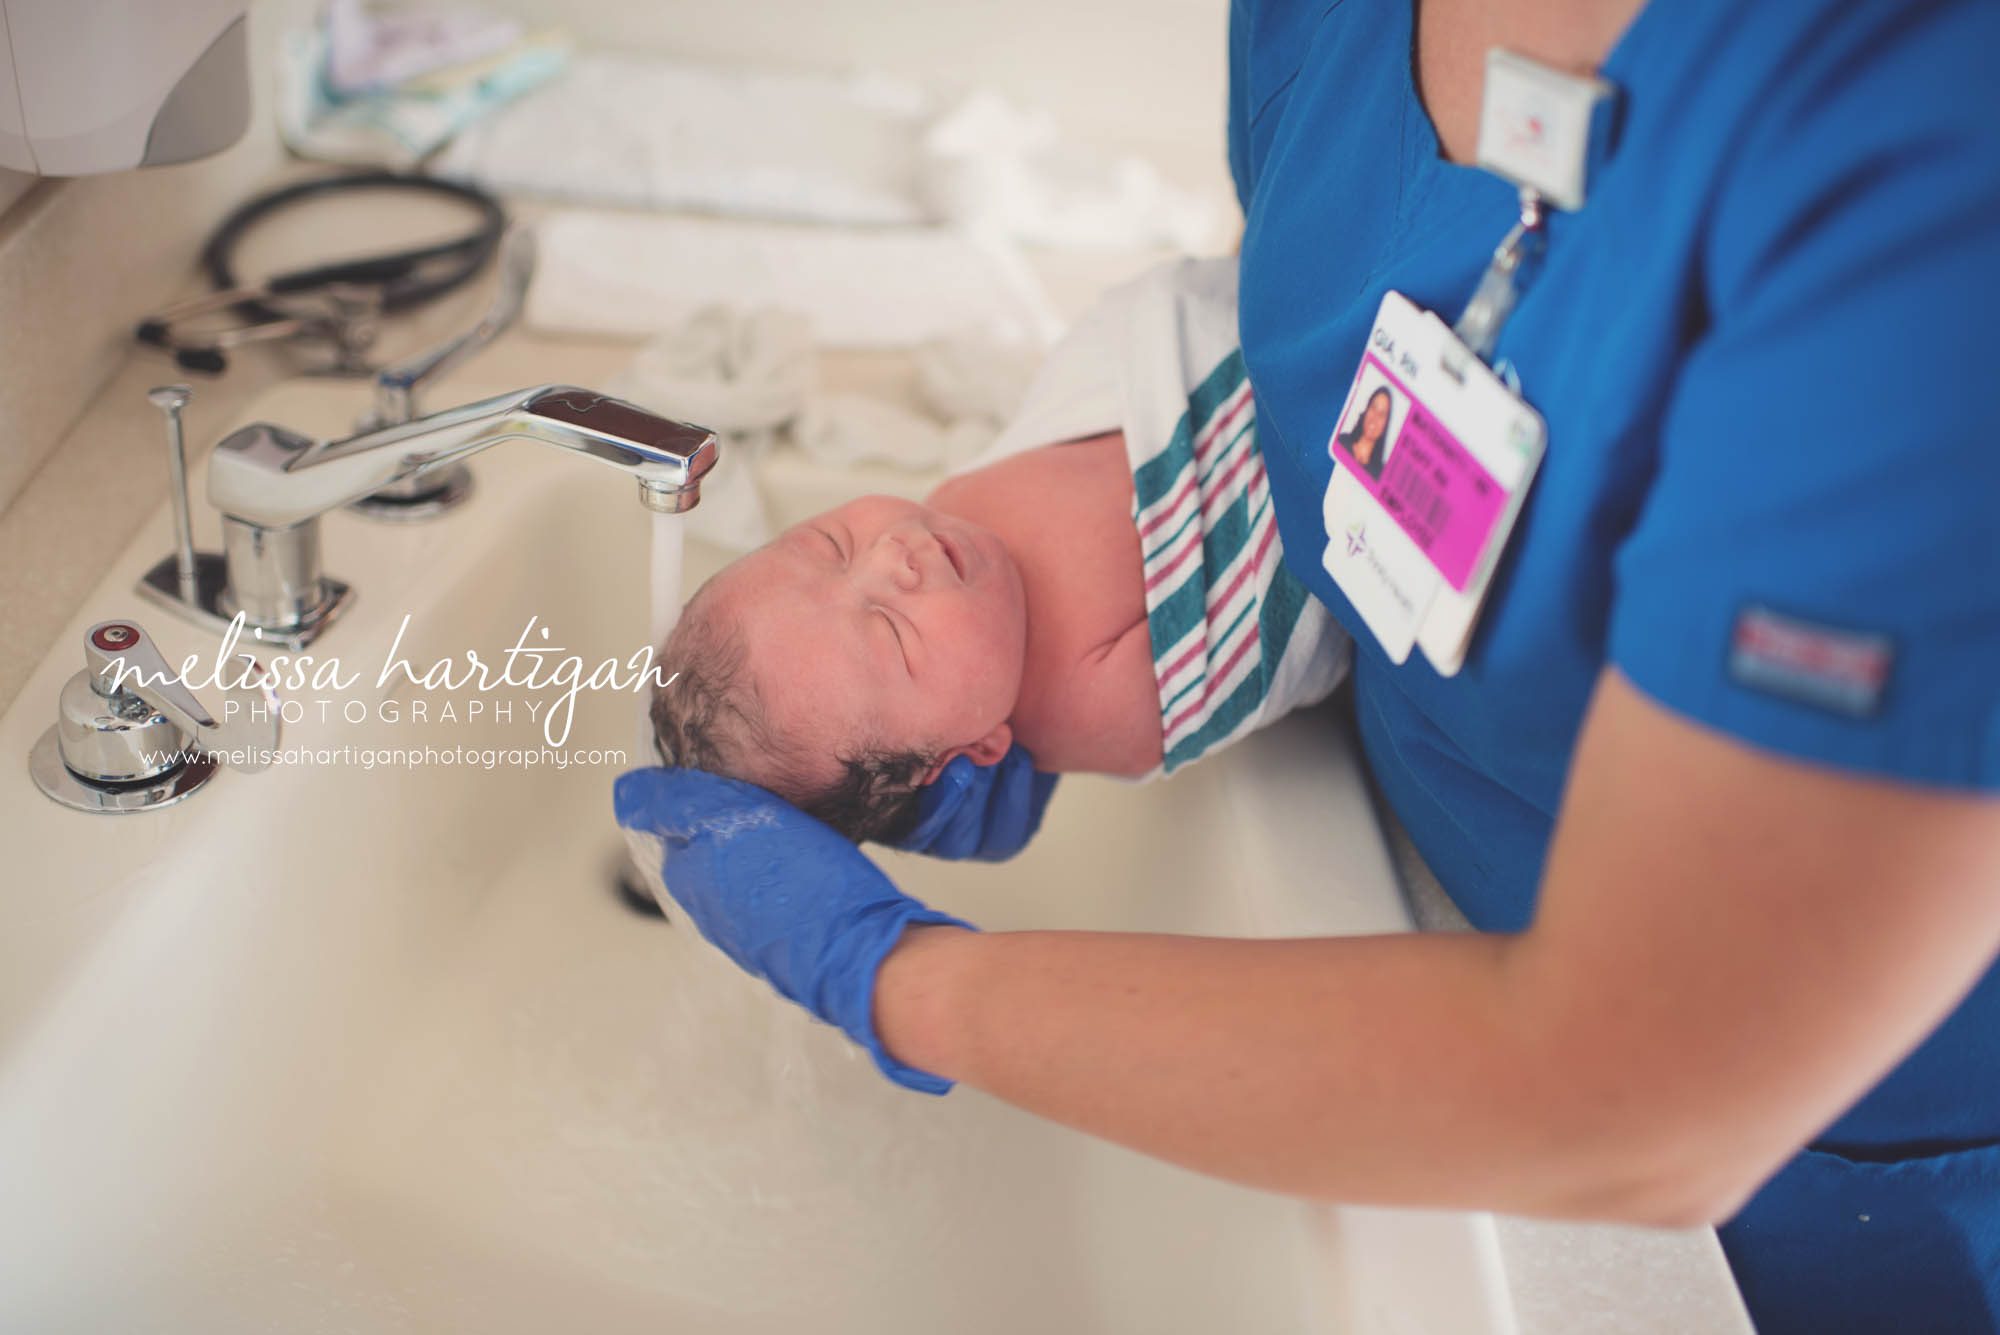 Melissa Hartigan Photography Connecticut Maternity and Newborn Photographer Piper Fresh 48 Newborn Session baby getting first bath in hospital